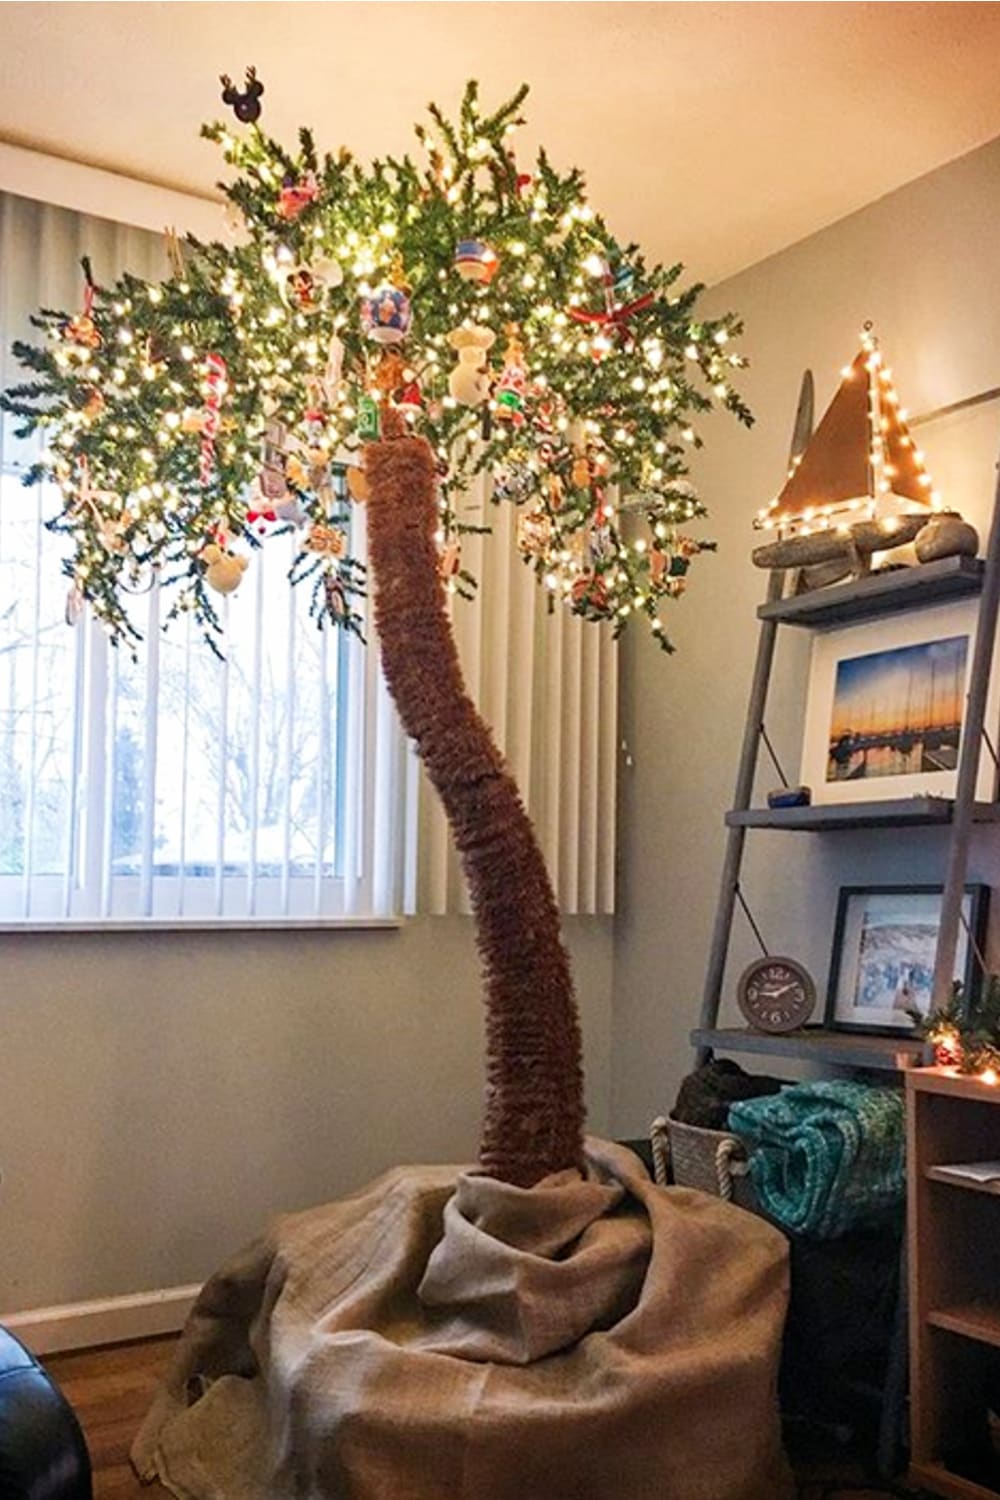 Christmas Tree ideas and unique Christmas tree alternatives - this palm tree Christmas tree is an affordable Christmas tree alternative for small spaces (small houses and apartments) -  I love a palm Christmas tree (or Christmas palm tree?) - fun and easy way to decorate your home for Christmas with a tropical flair - see more fake palm trees decorated for Christmas.